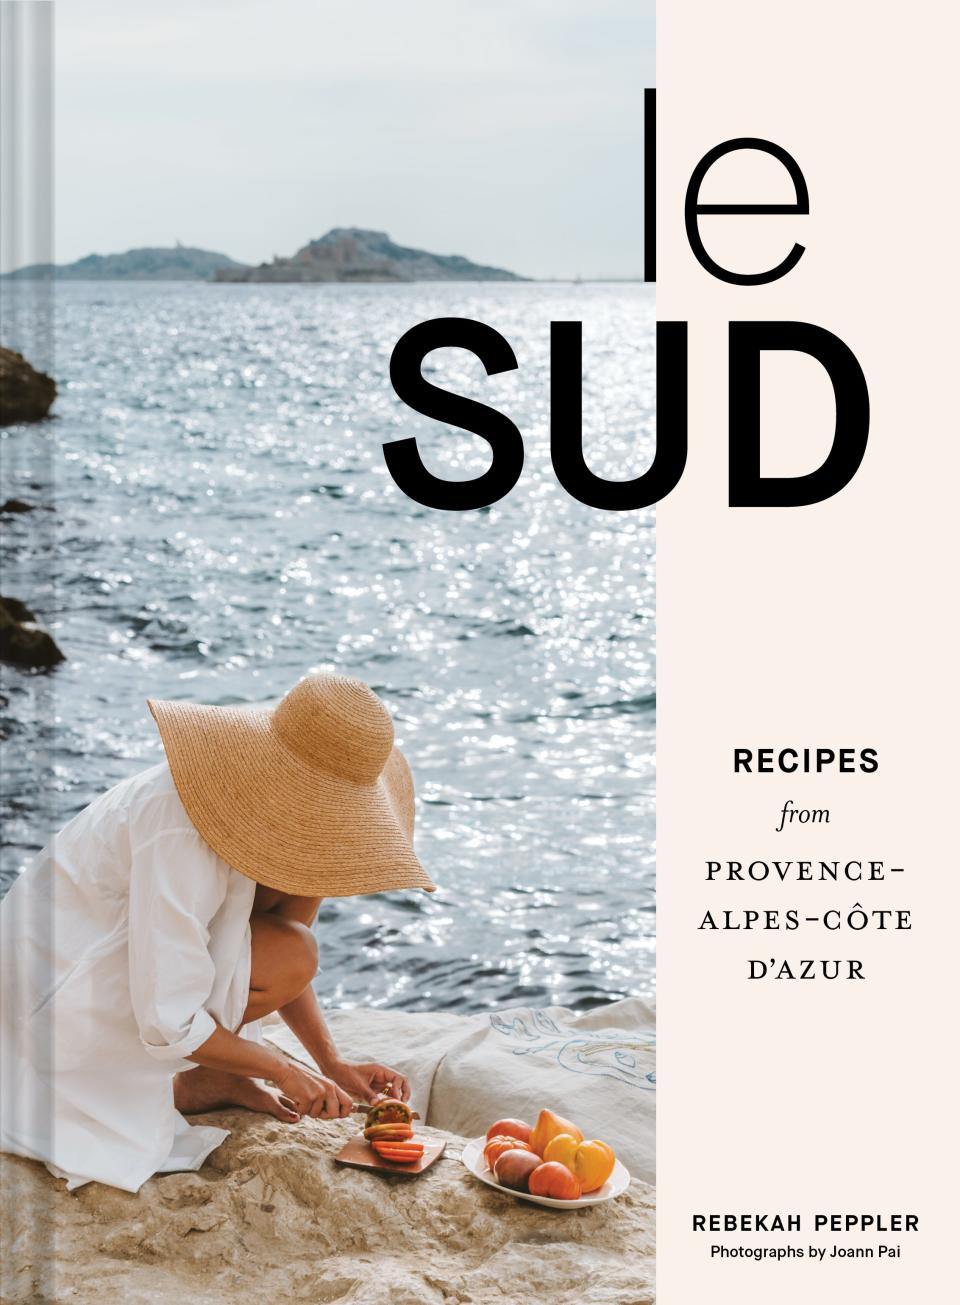 “Le Sud: Recipes from Provence-Alpes-Cote d’Azur” (Chronicle Books) is Rebekah Peppler's third book.